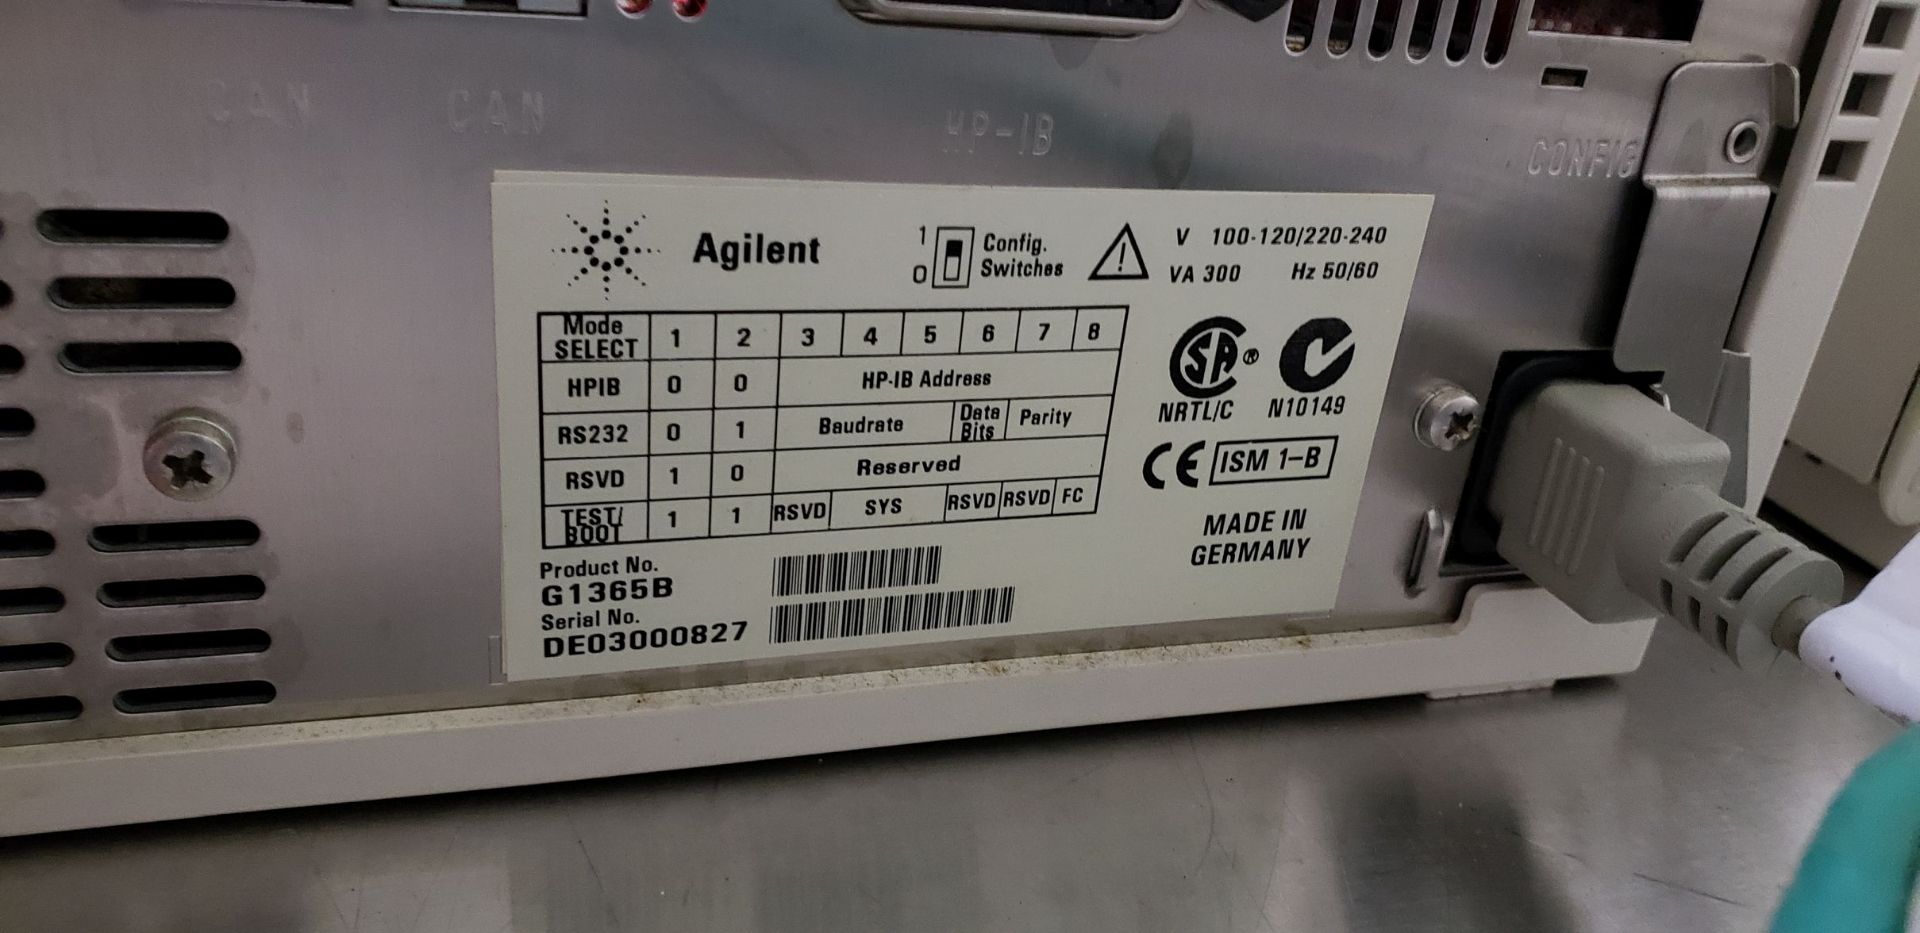 Agilent HPLC System, 1100 Series - Image 18 of 34